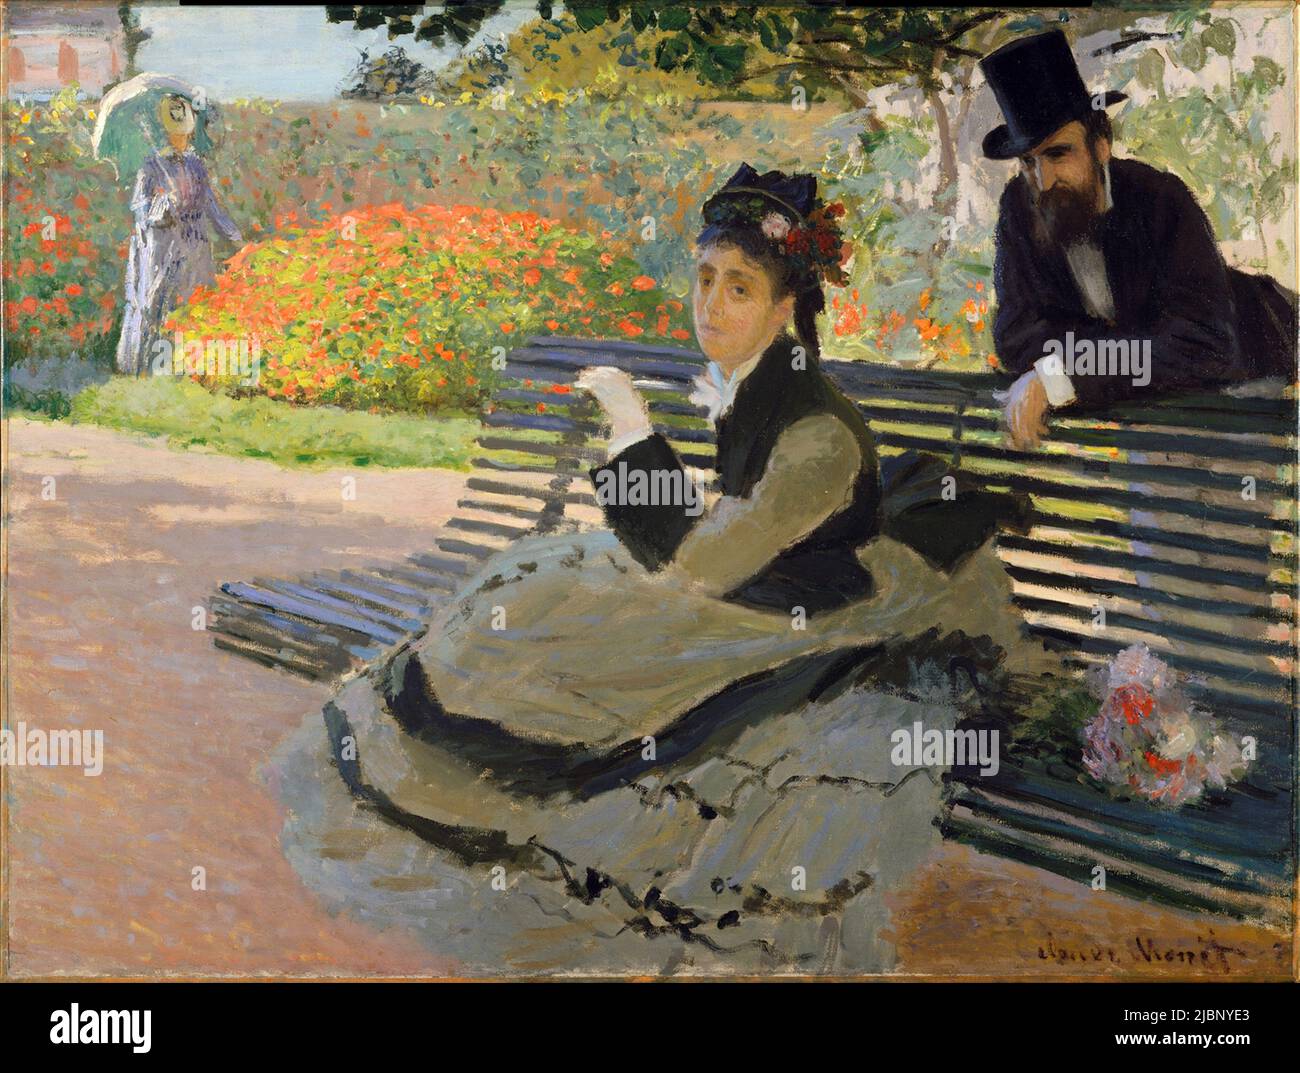 Camille Monet on a Garden Bench, 1873, Painting by Claude Monet Stock Photo